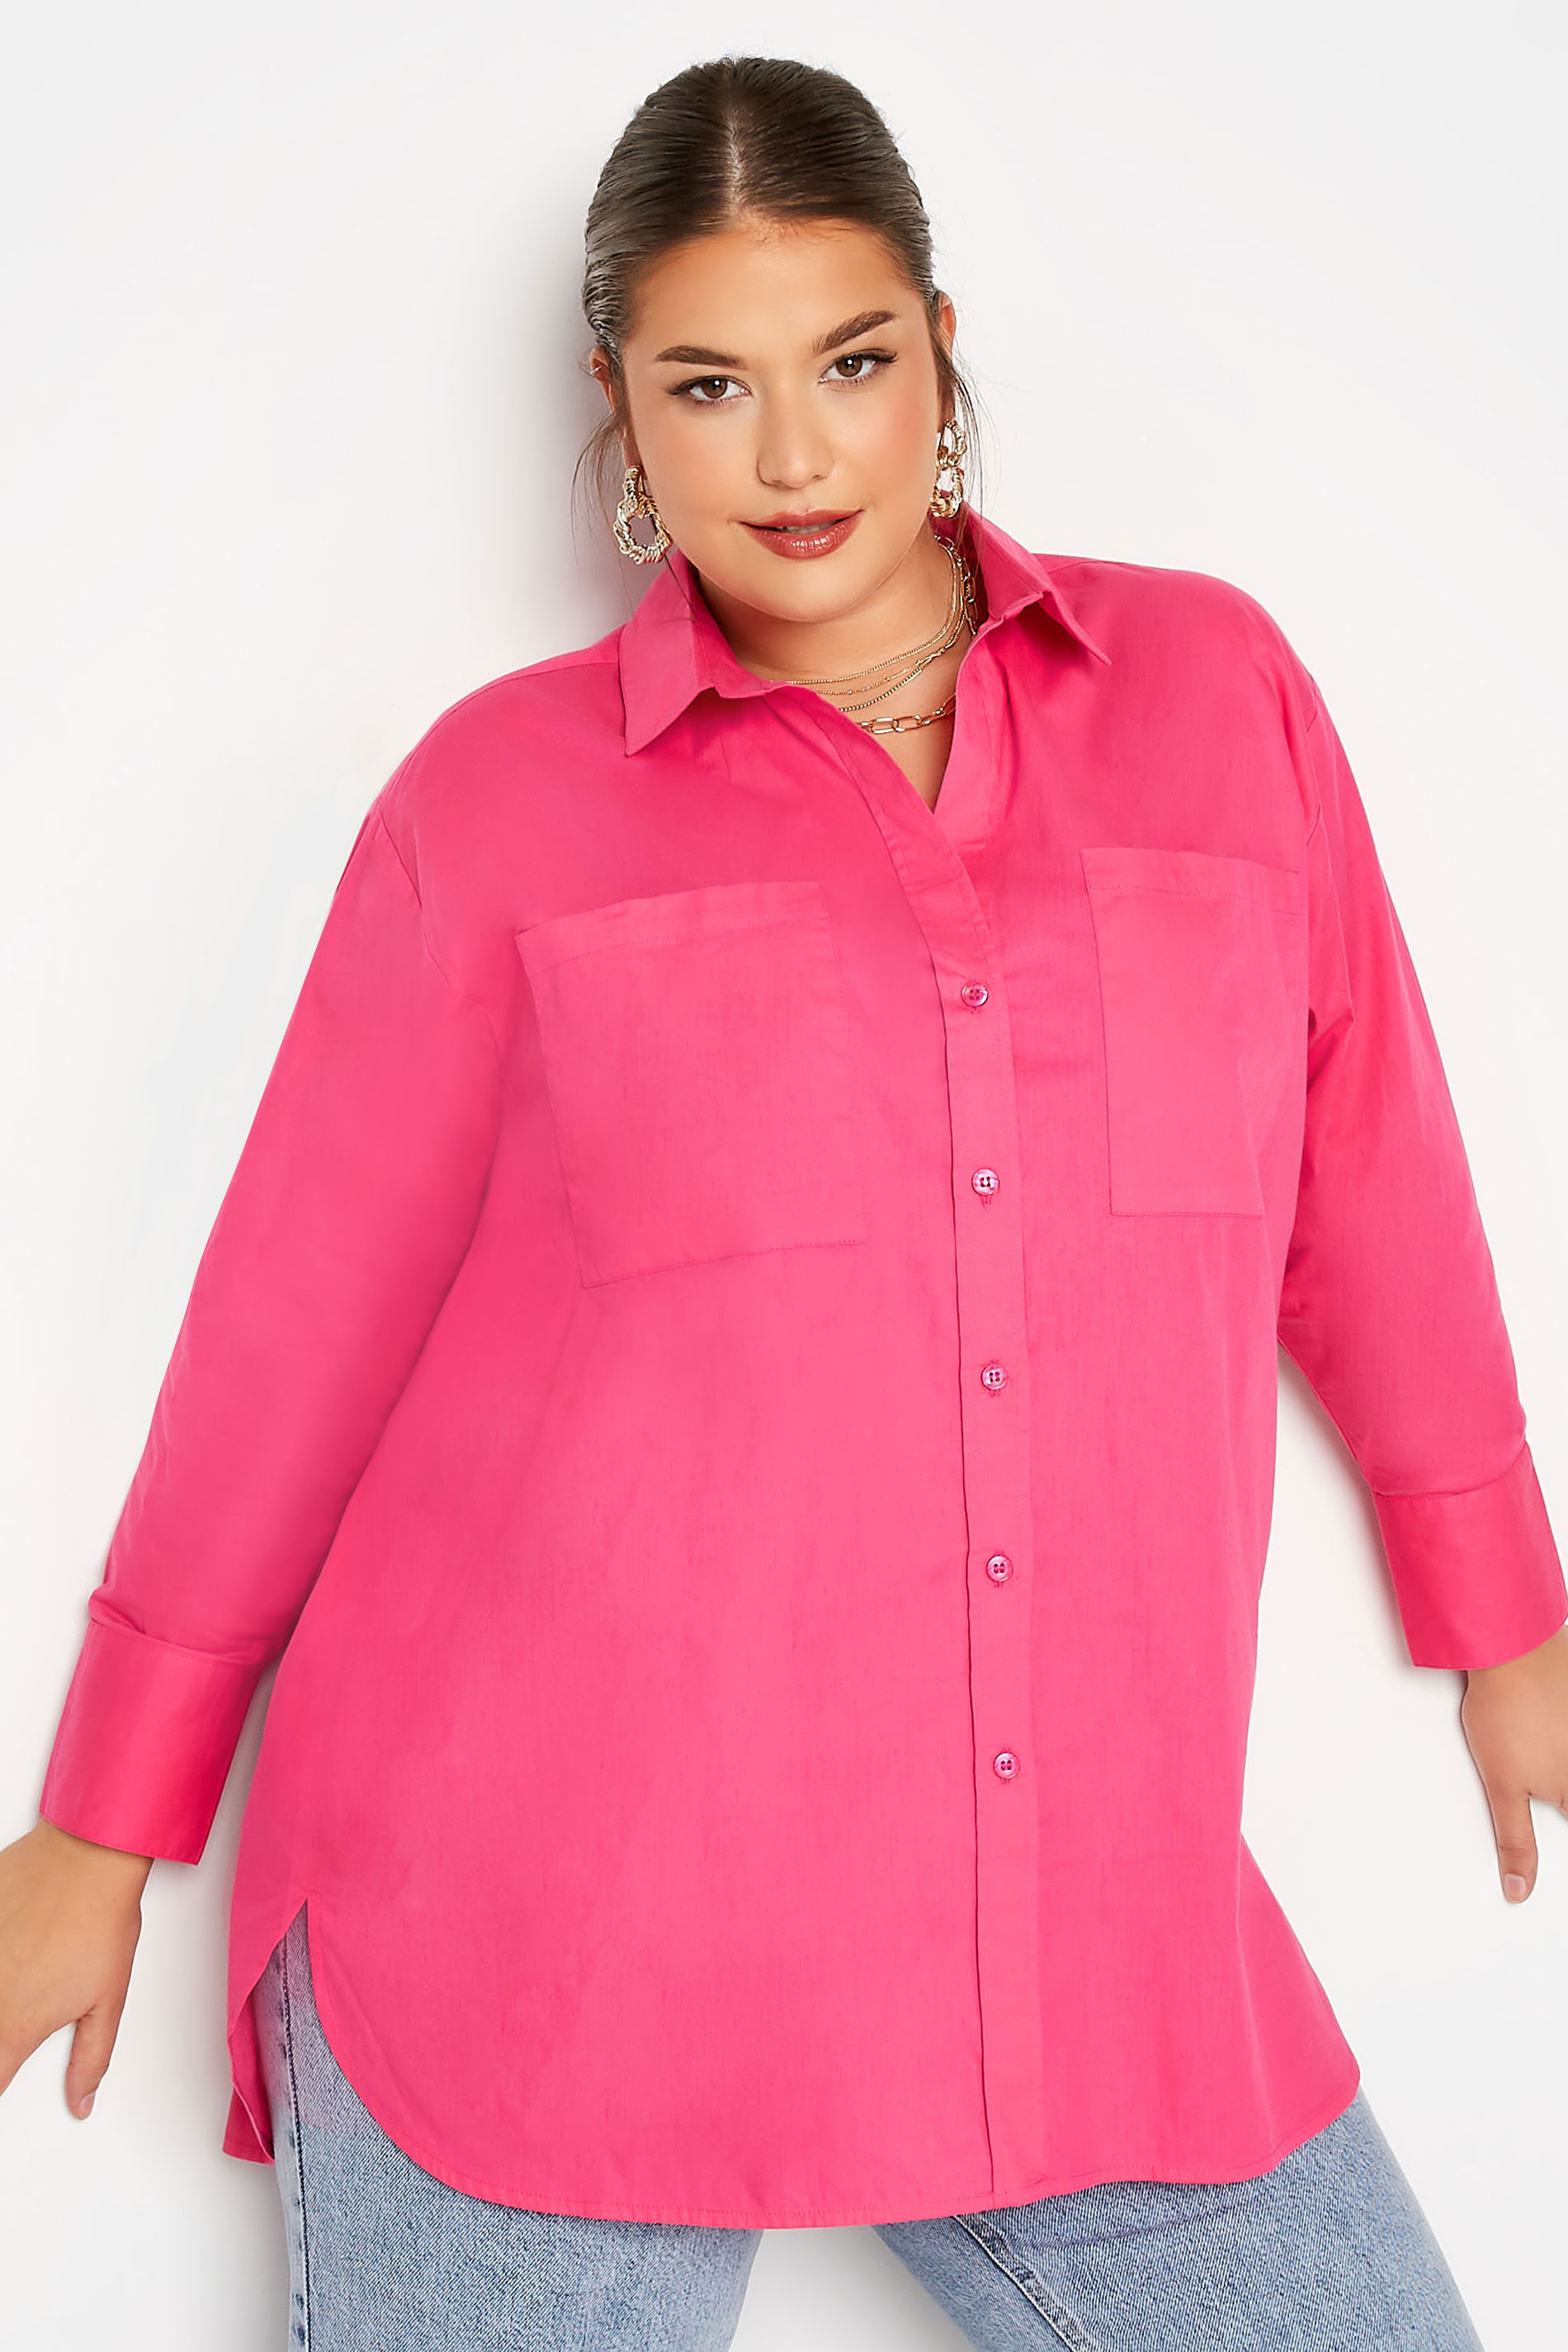 Grande taille  Blouses & Chemisiers Grande taille  Chemisiers | LIMITED COLLECTION - Chemisier Rose Bonbon Oversize Boyfriend - YP49284